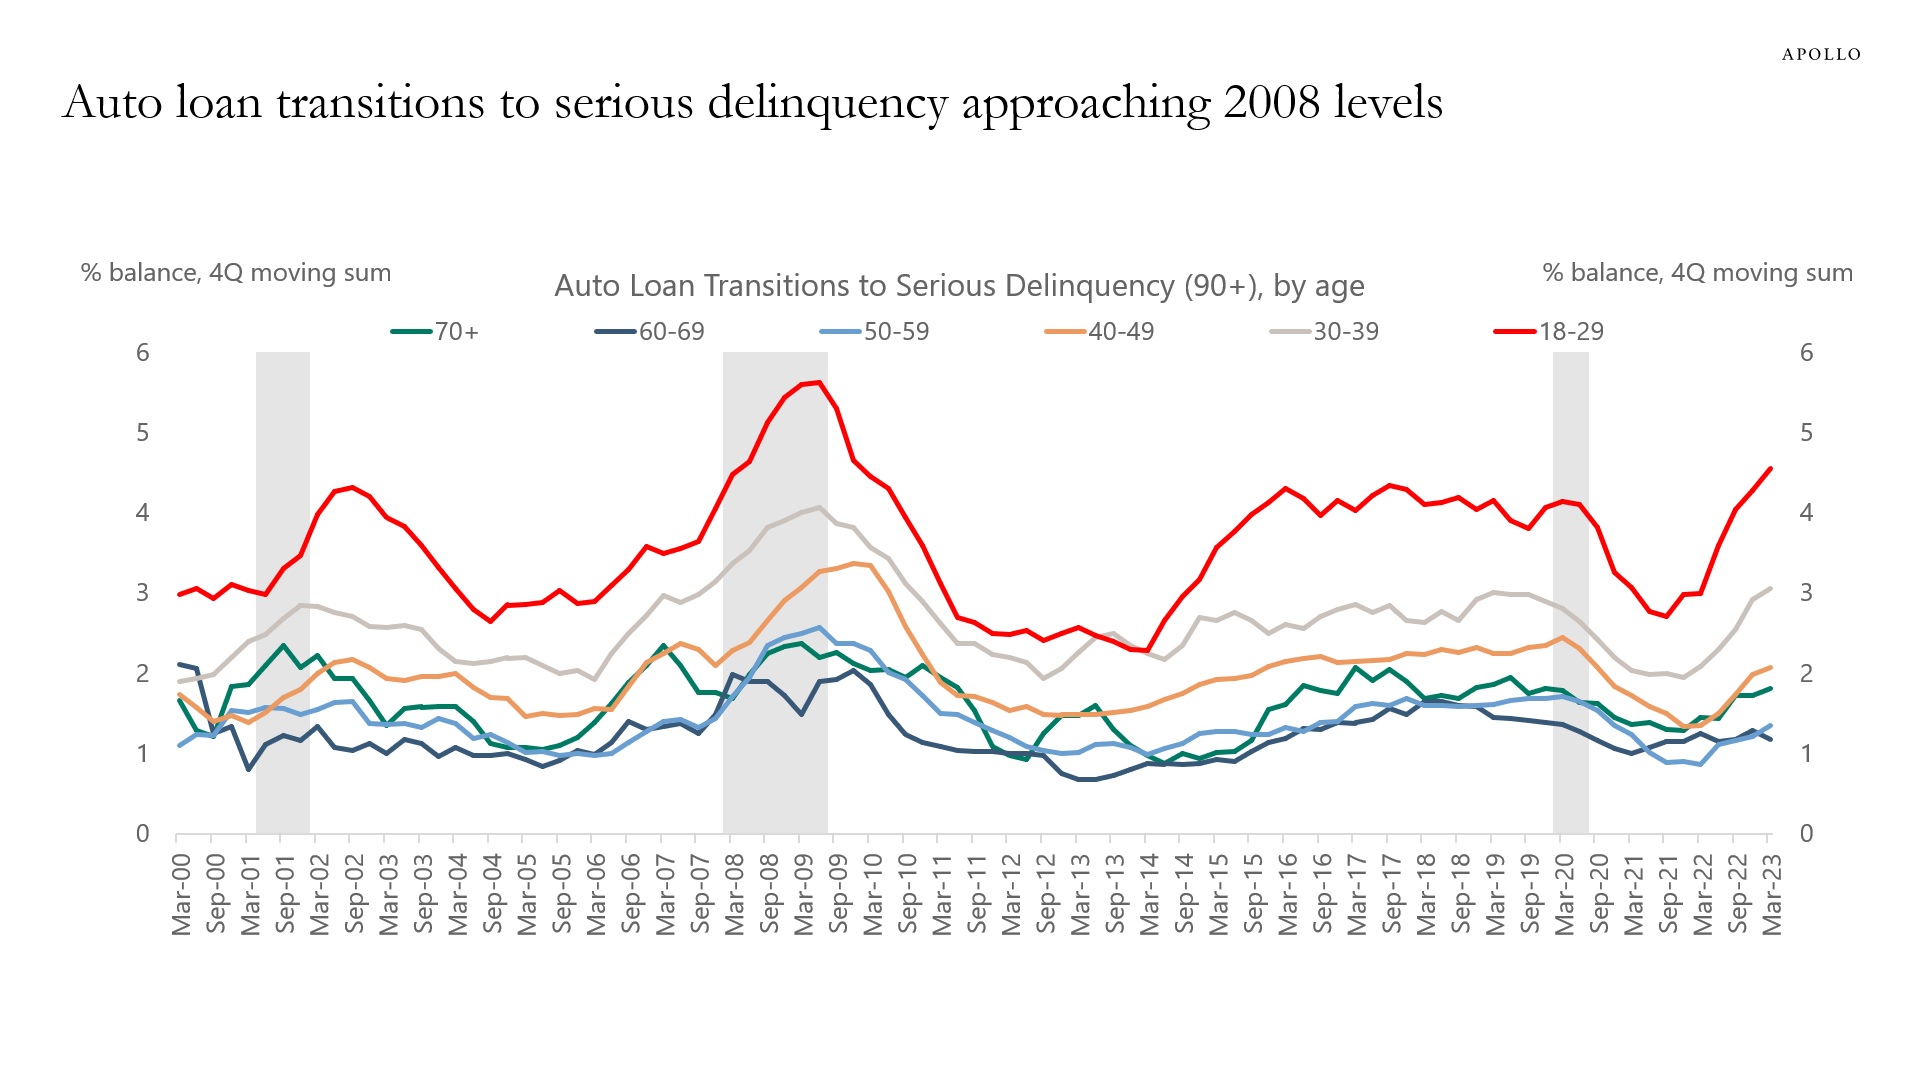 Auto loans are becoming seriously delinquent. 